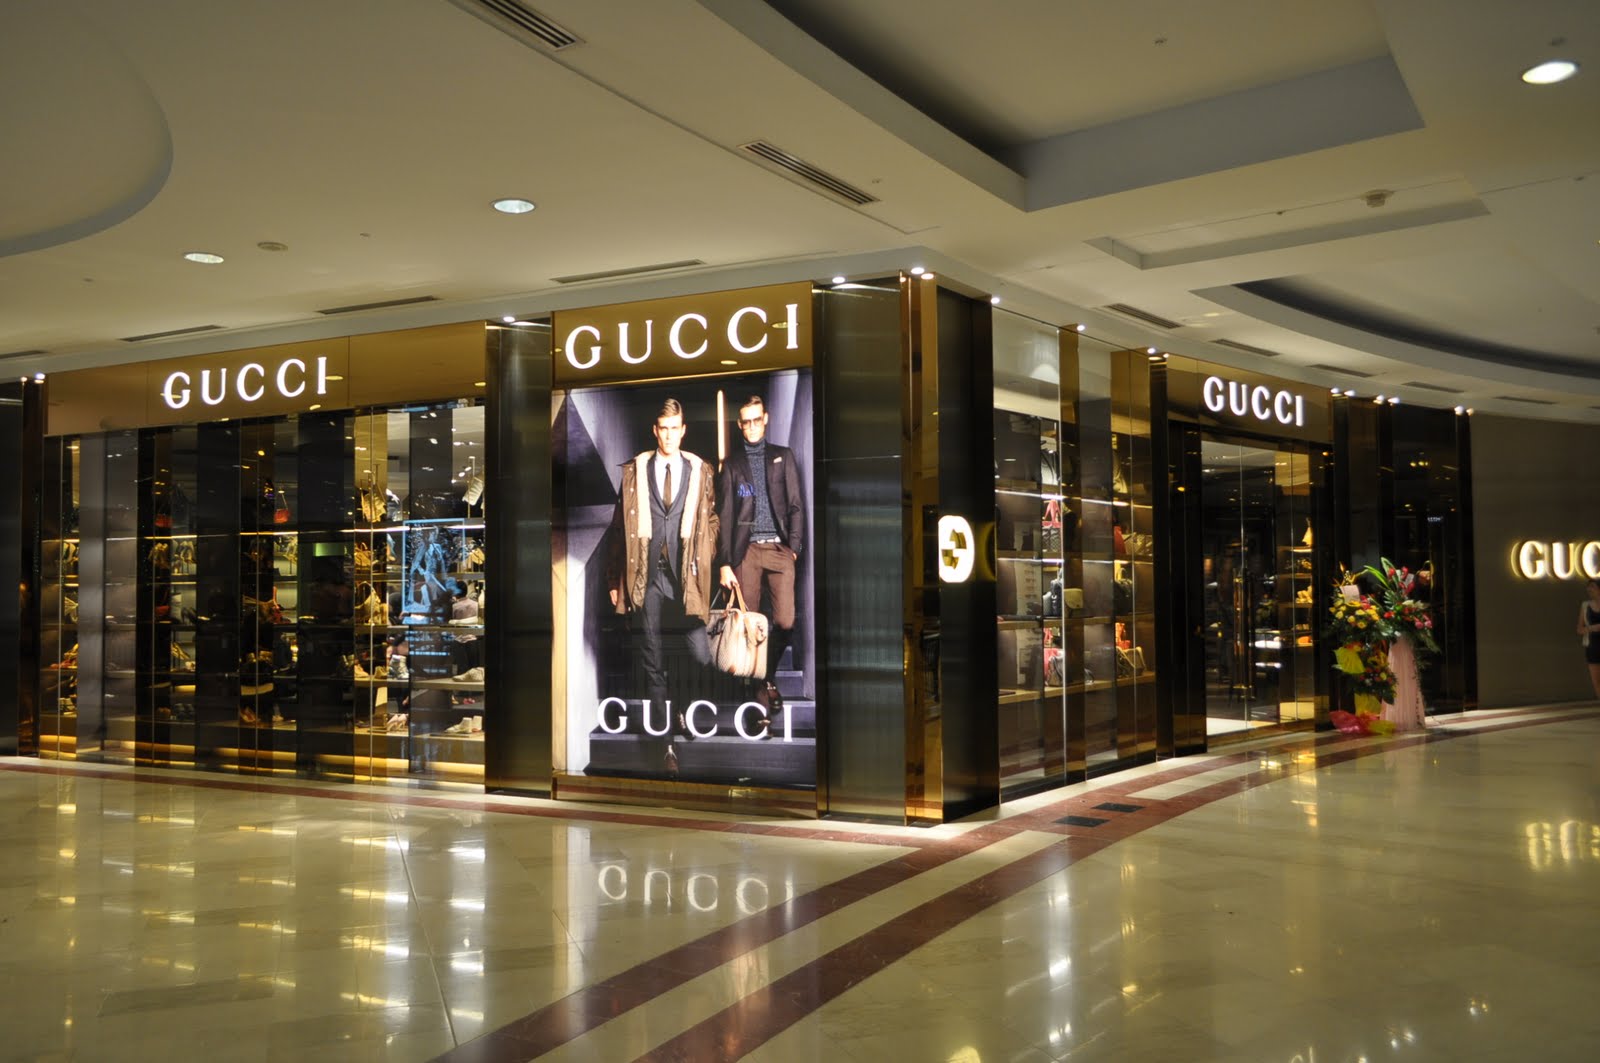 Gucci Stores - Page 4 - SkyscraperCity